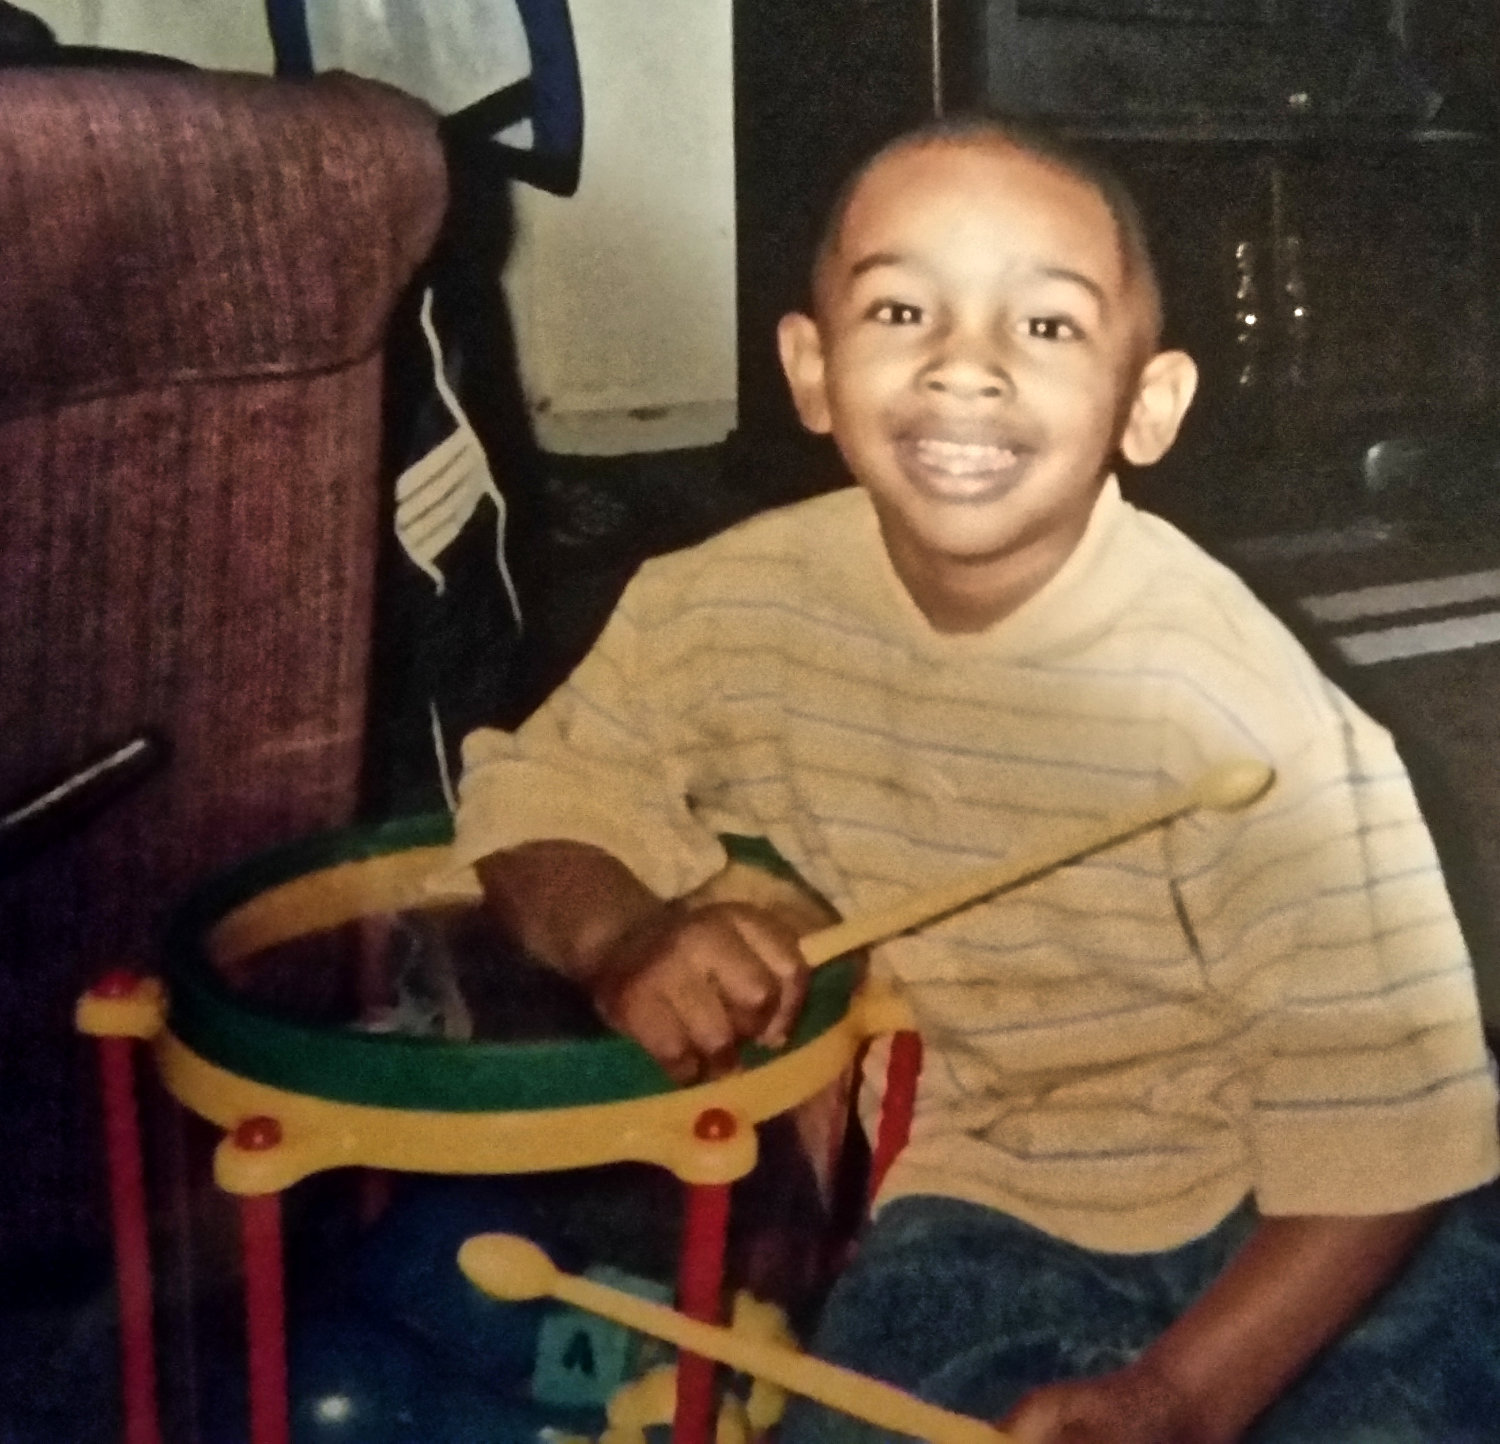 A young Jaylon Harper with his drums.